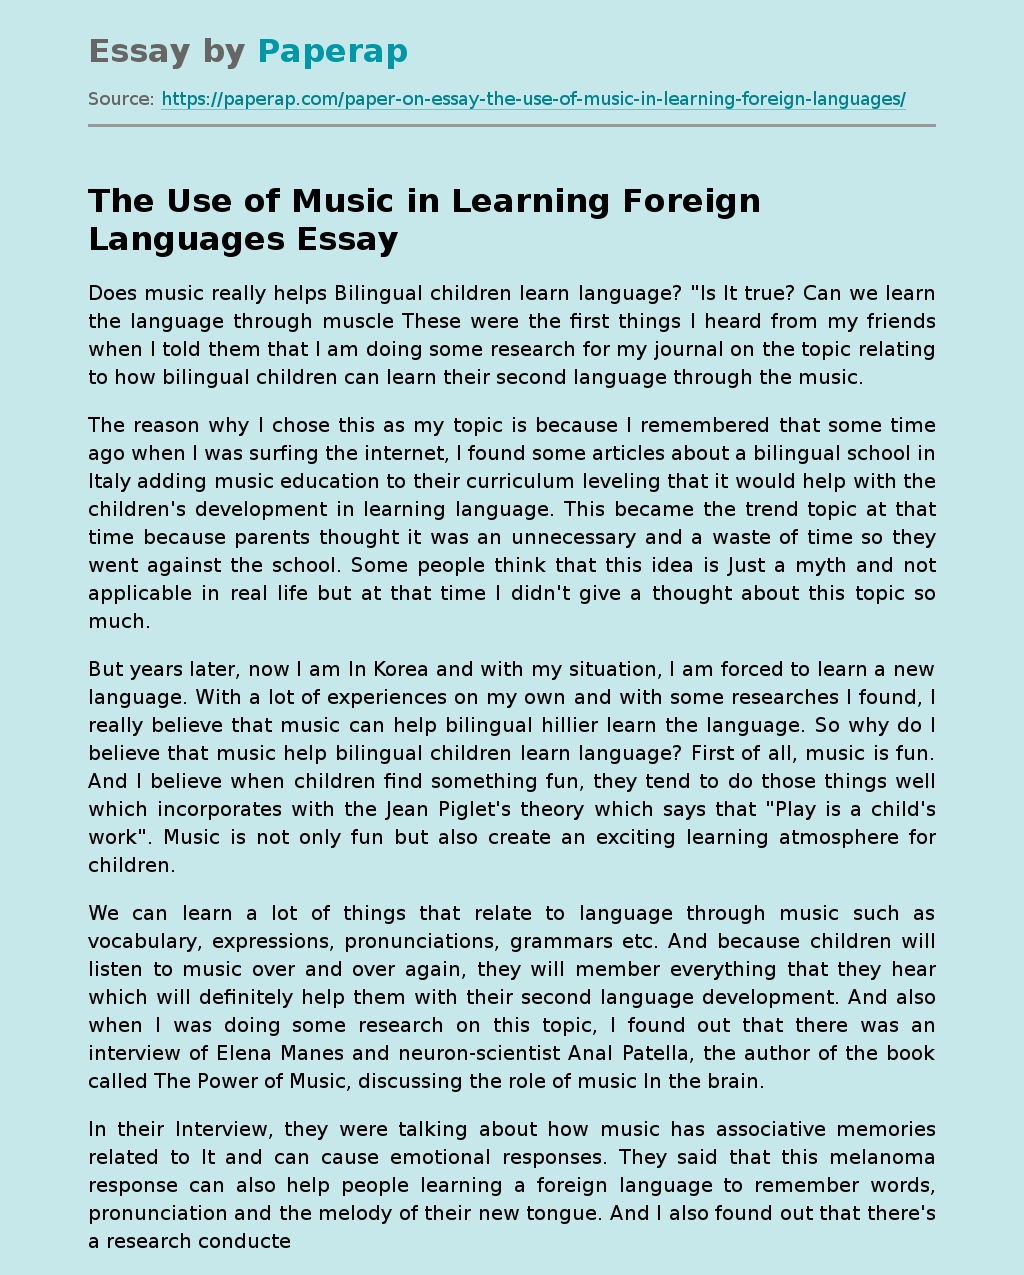 The Use of Music in Learning Foreign Languages